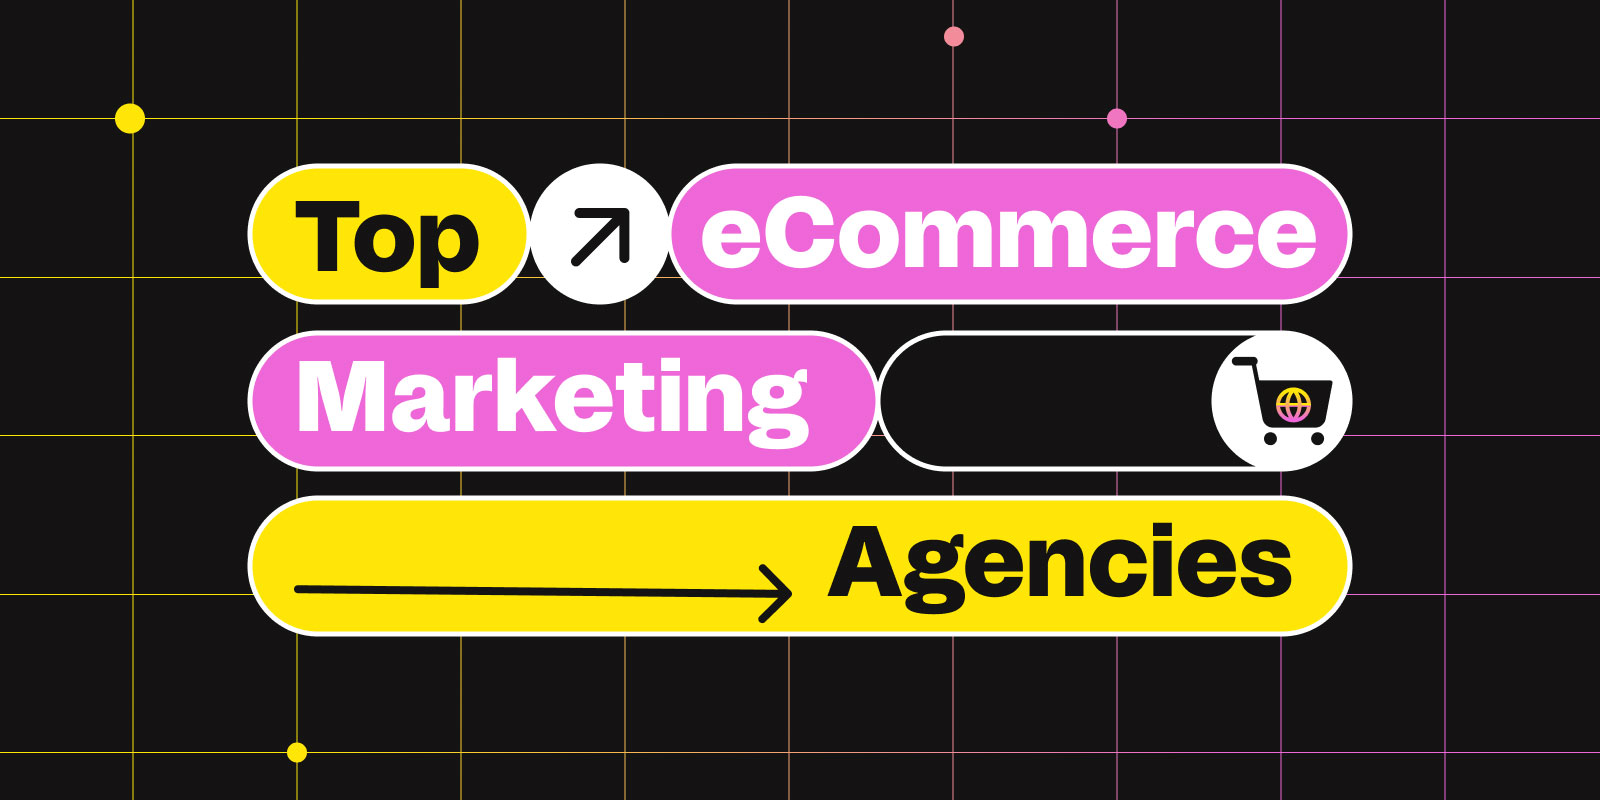 Finding the Top eCommerce Marketing Agency: Top 31 Choices [Updated]